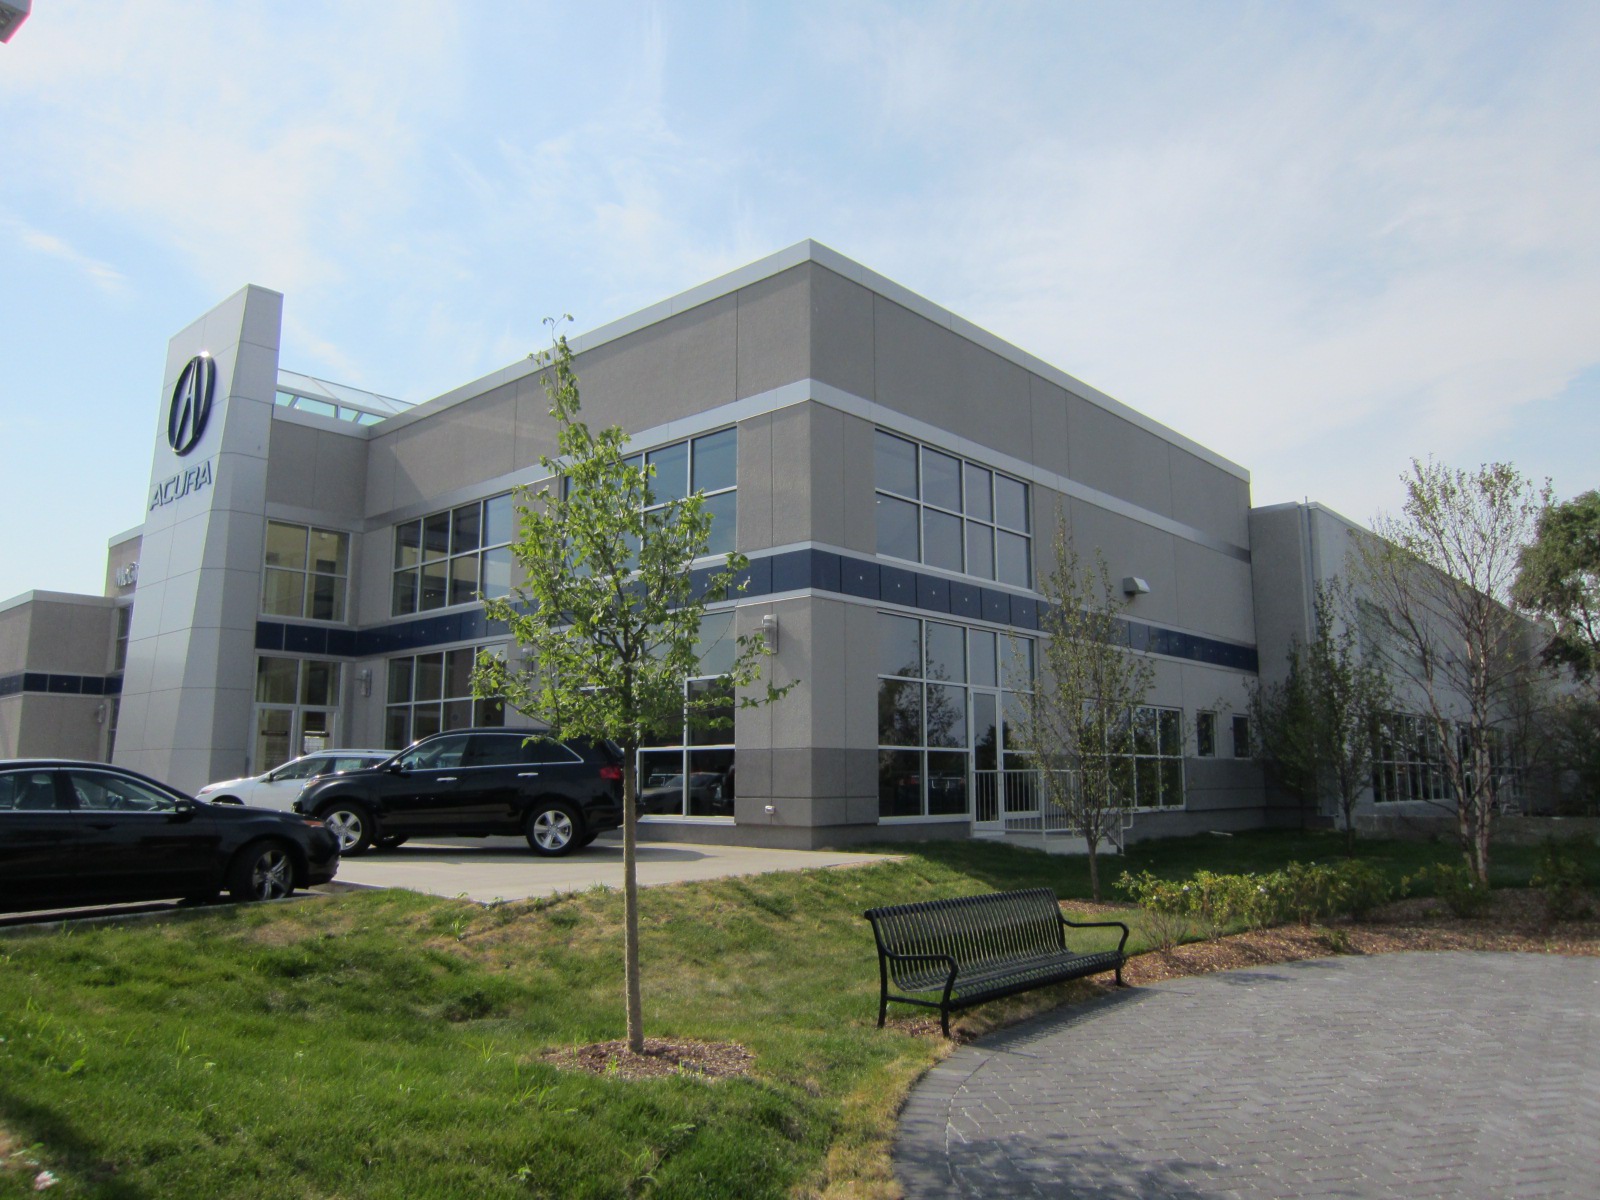 The Missner Group recently completed construction on the new 57,550-sf McGrath A